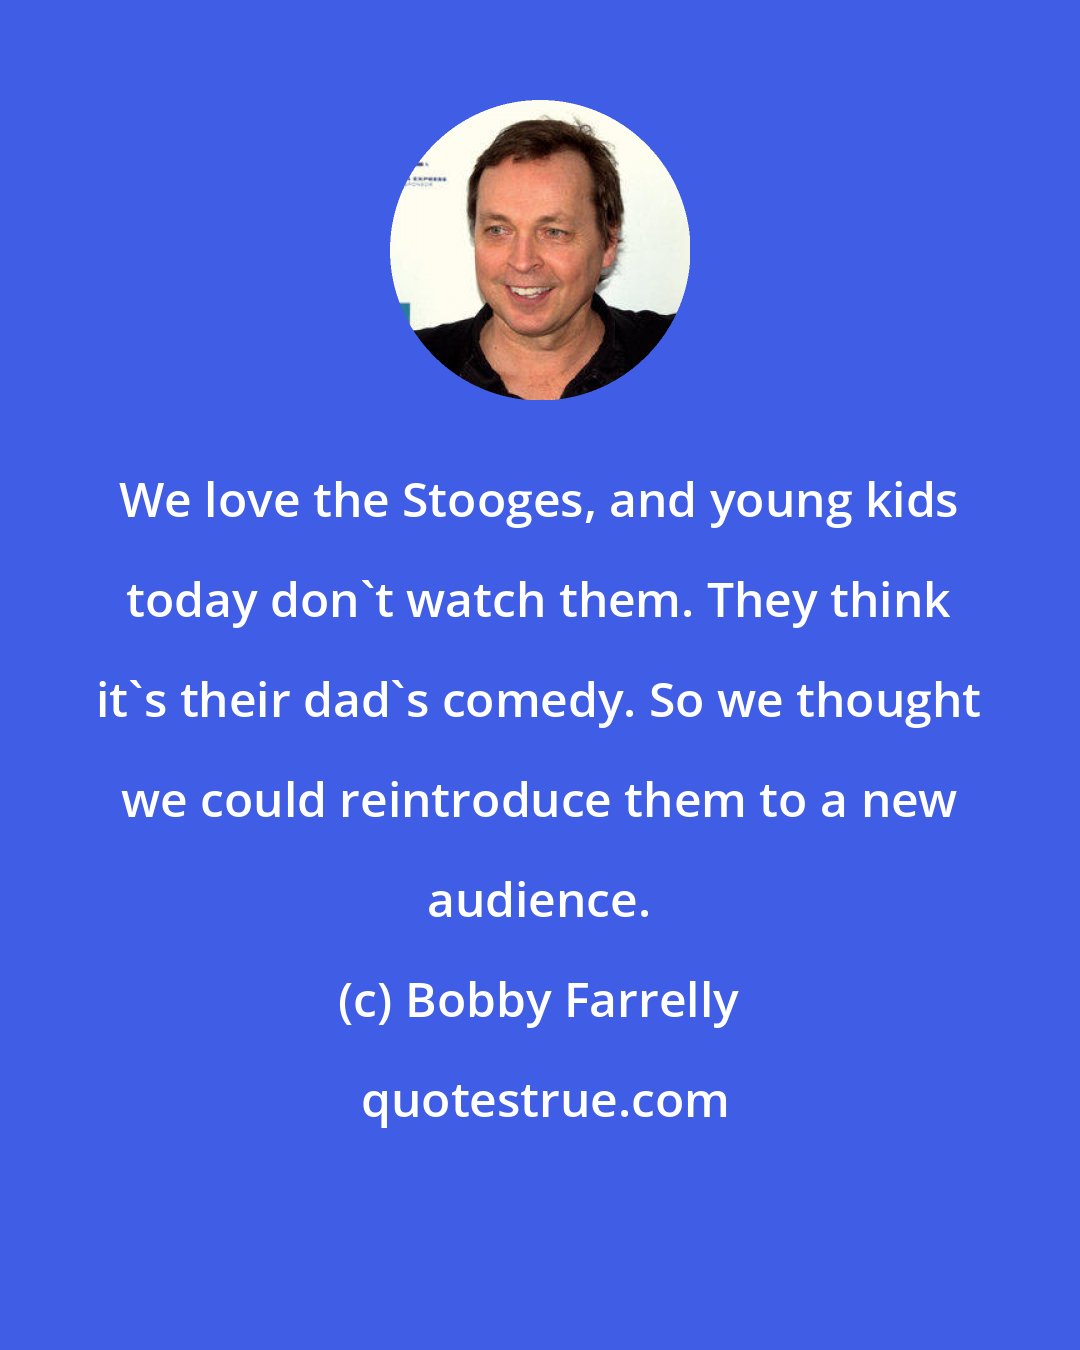 Bobby Farrelly: We love the Stooges, and young kids today don't watch them. They think it's their dad's comedy. So we thought we could reintroduce them to a new audience.